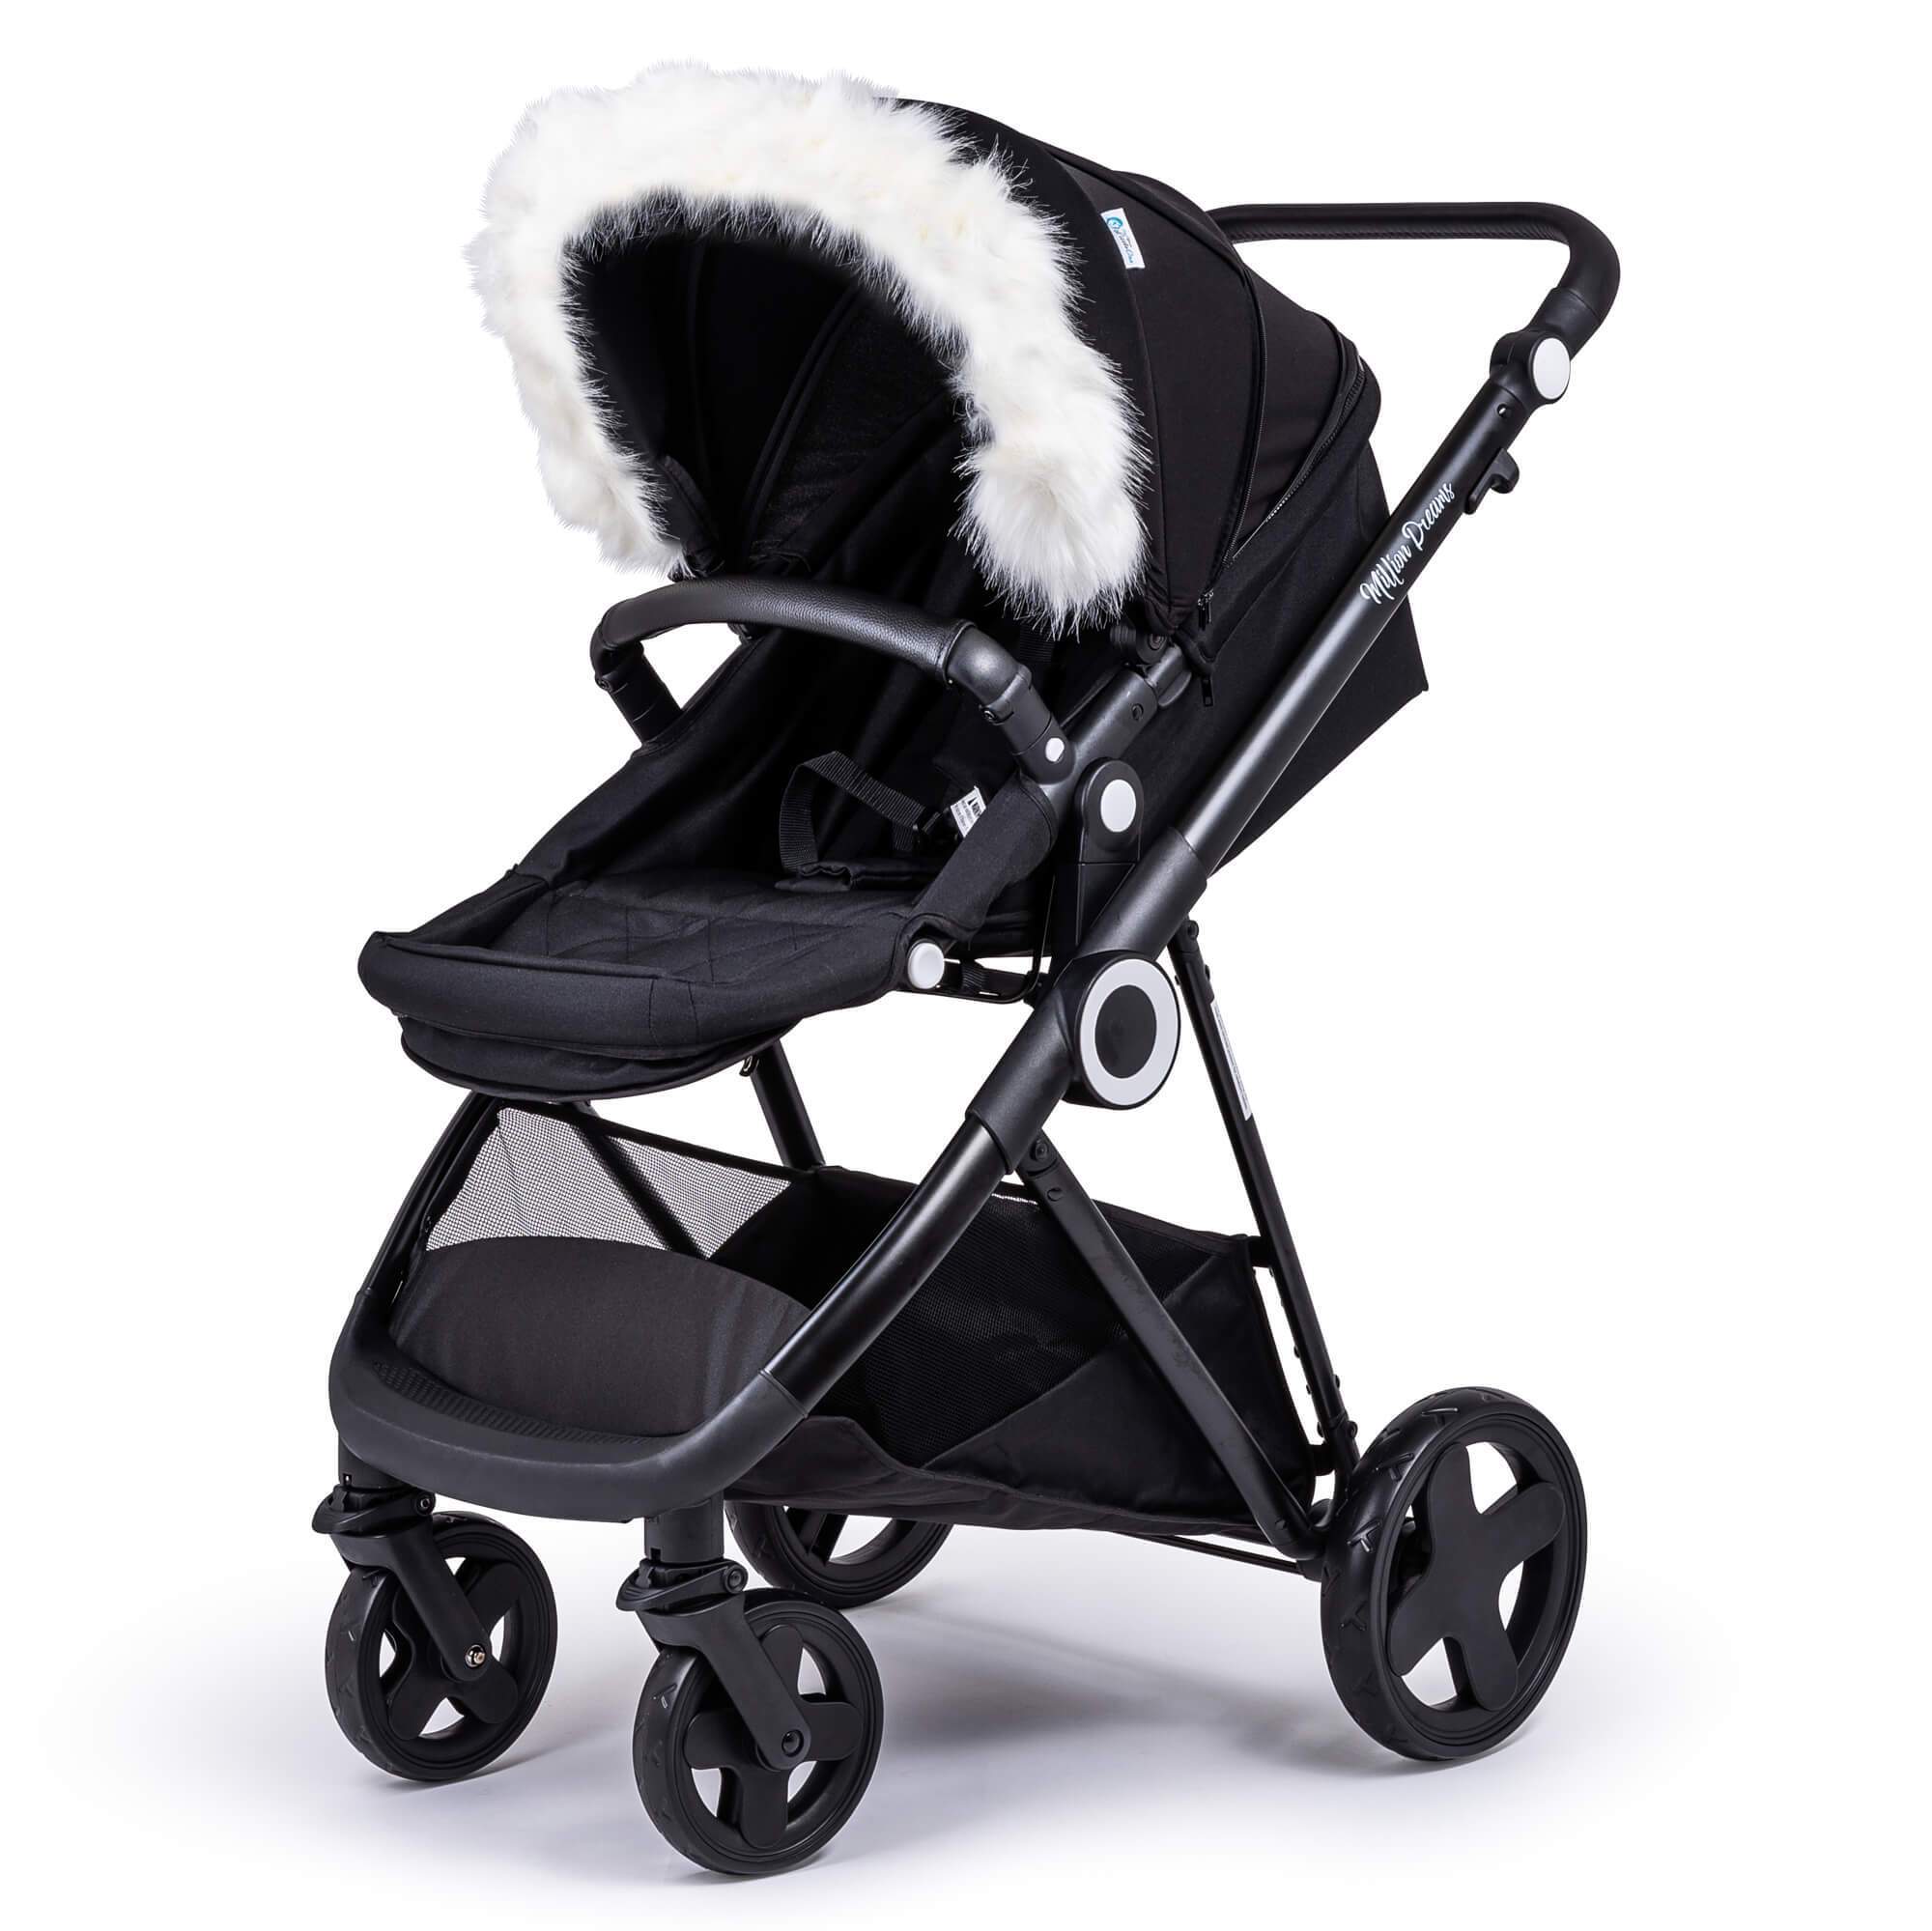 Pram Fur Hood Trim Attachment for Pushchair Compatible with Little Shield - White / Fits All Models | For Your Little One